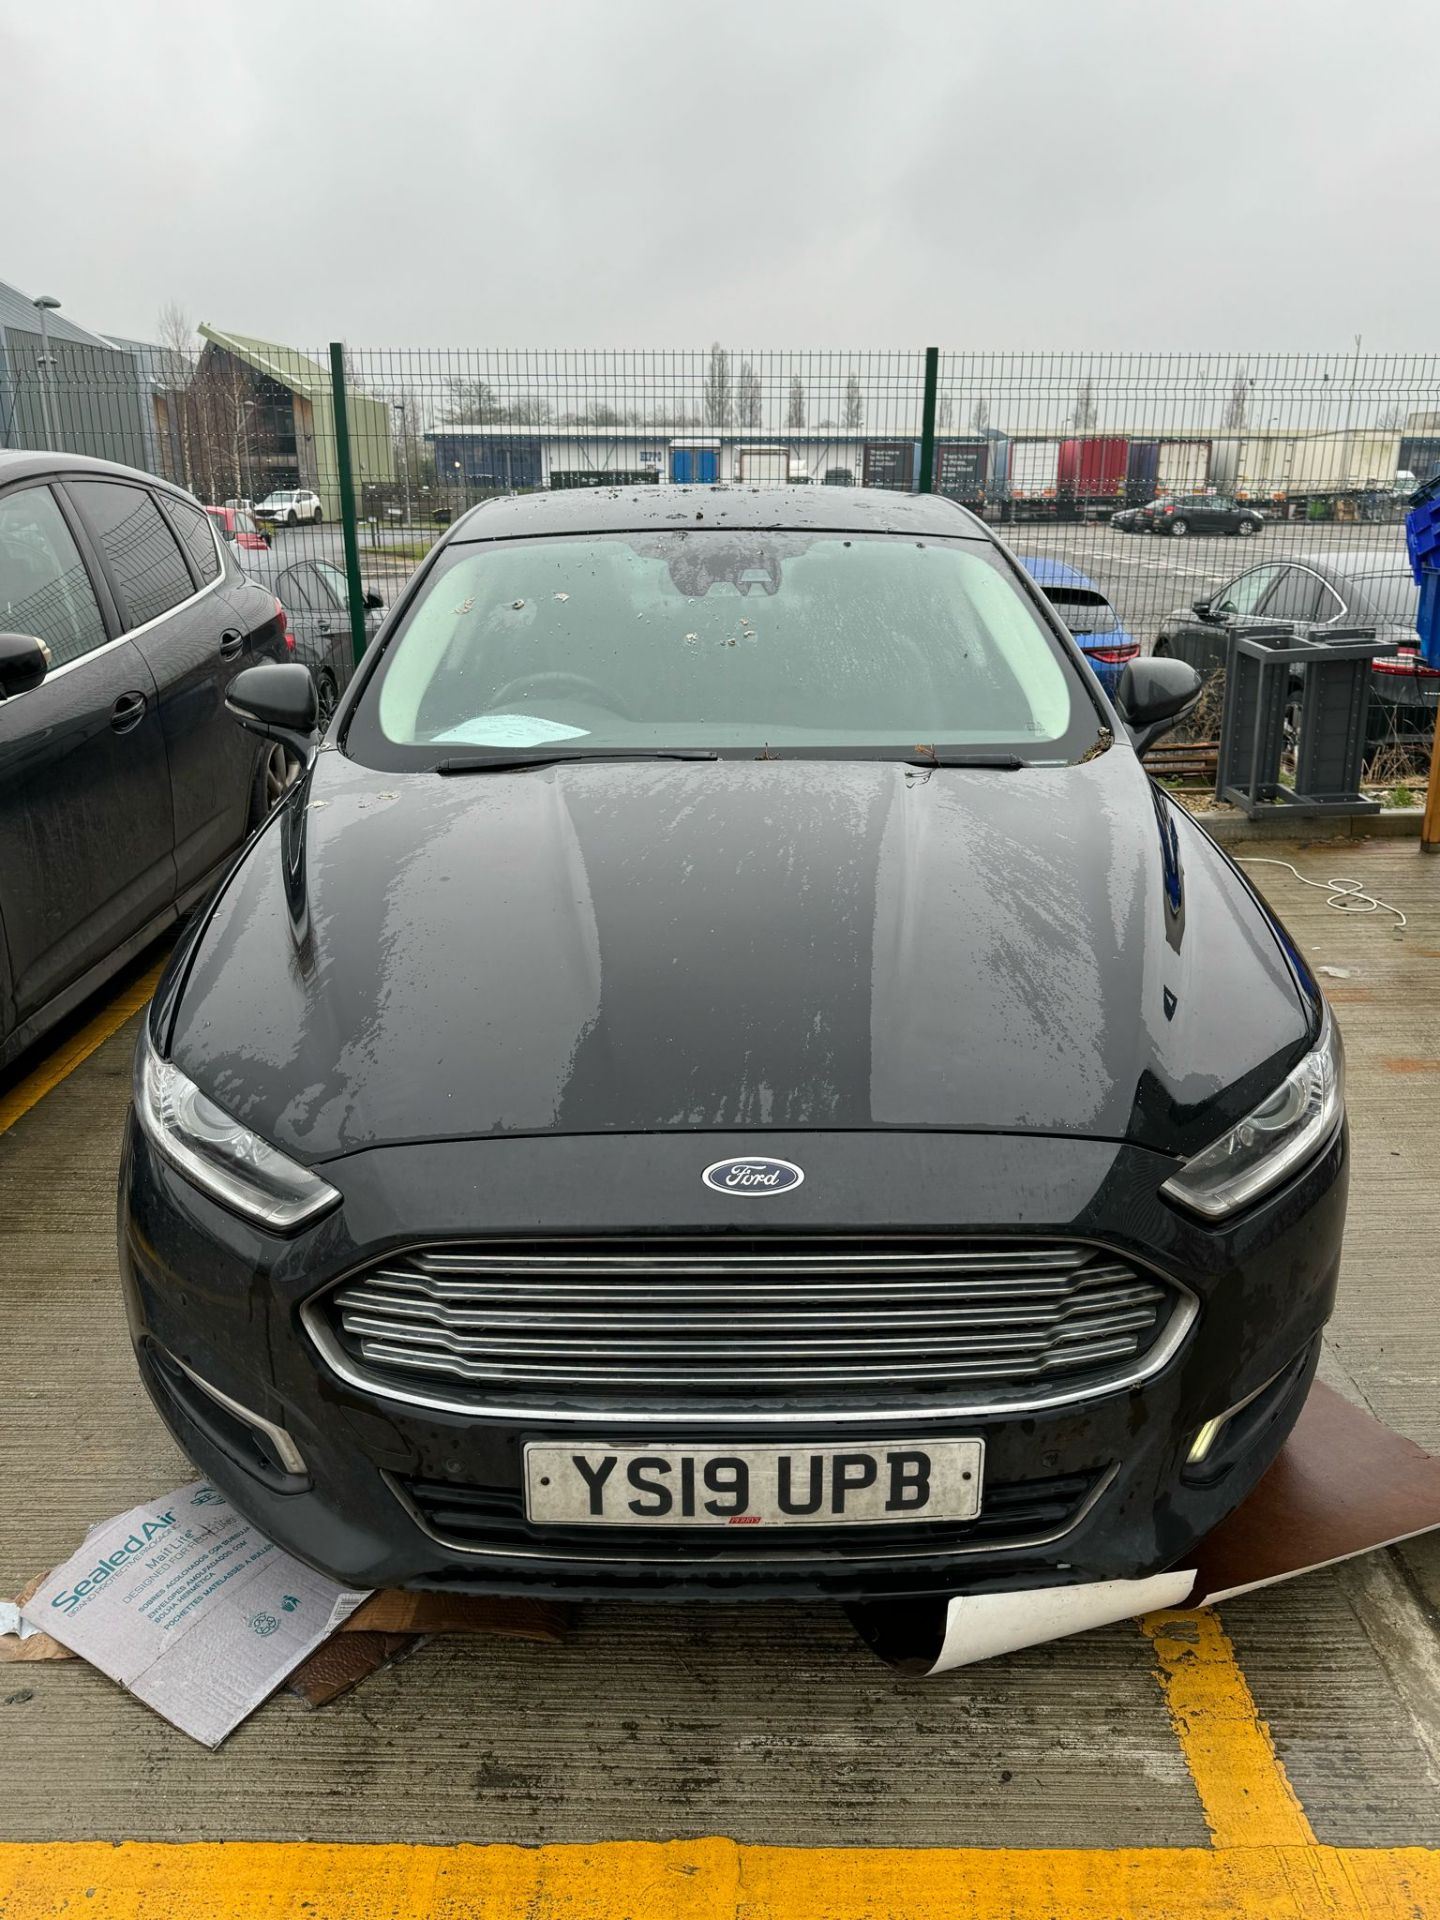 NO RESERVE - 2019, FORD Mondeo (Ex-Fleet Vehicle) - Image 6 of 19